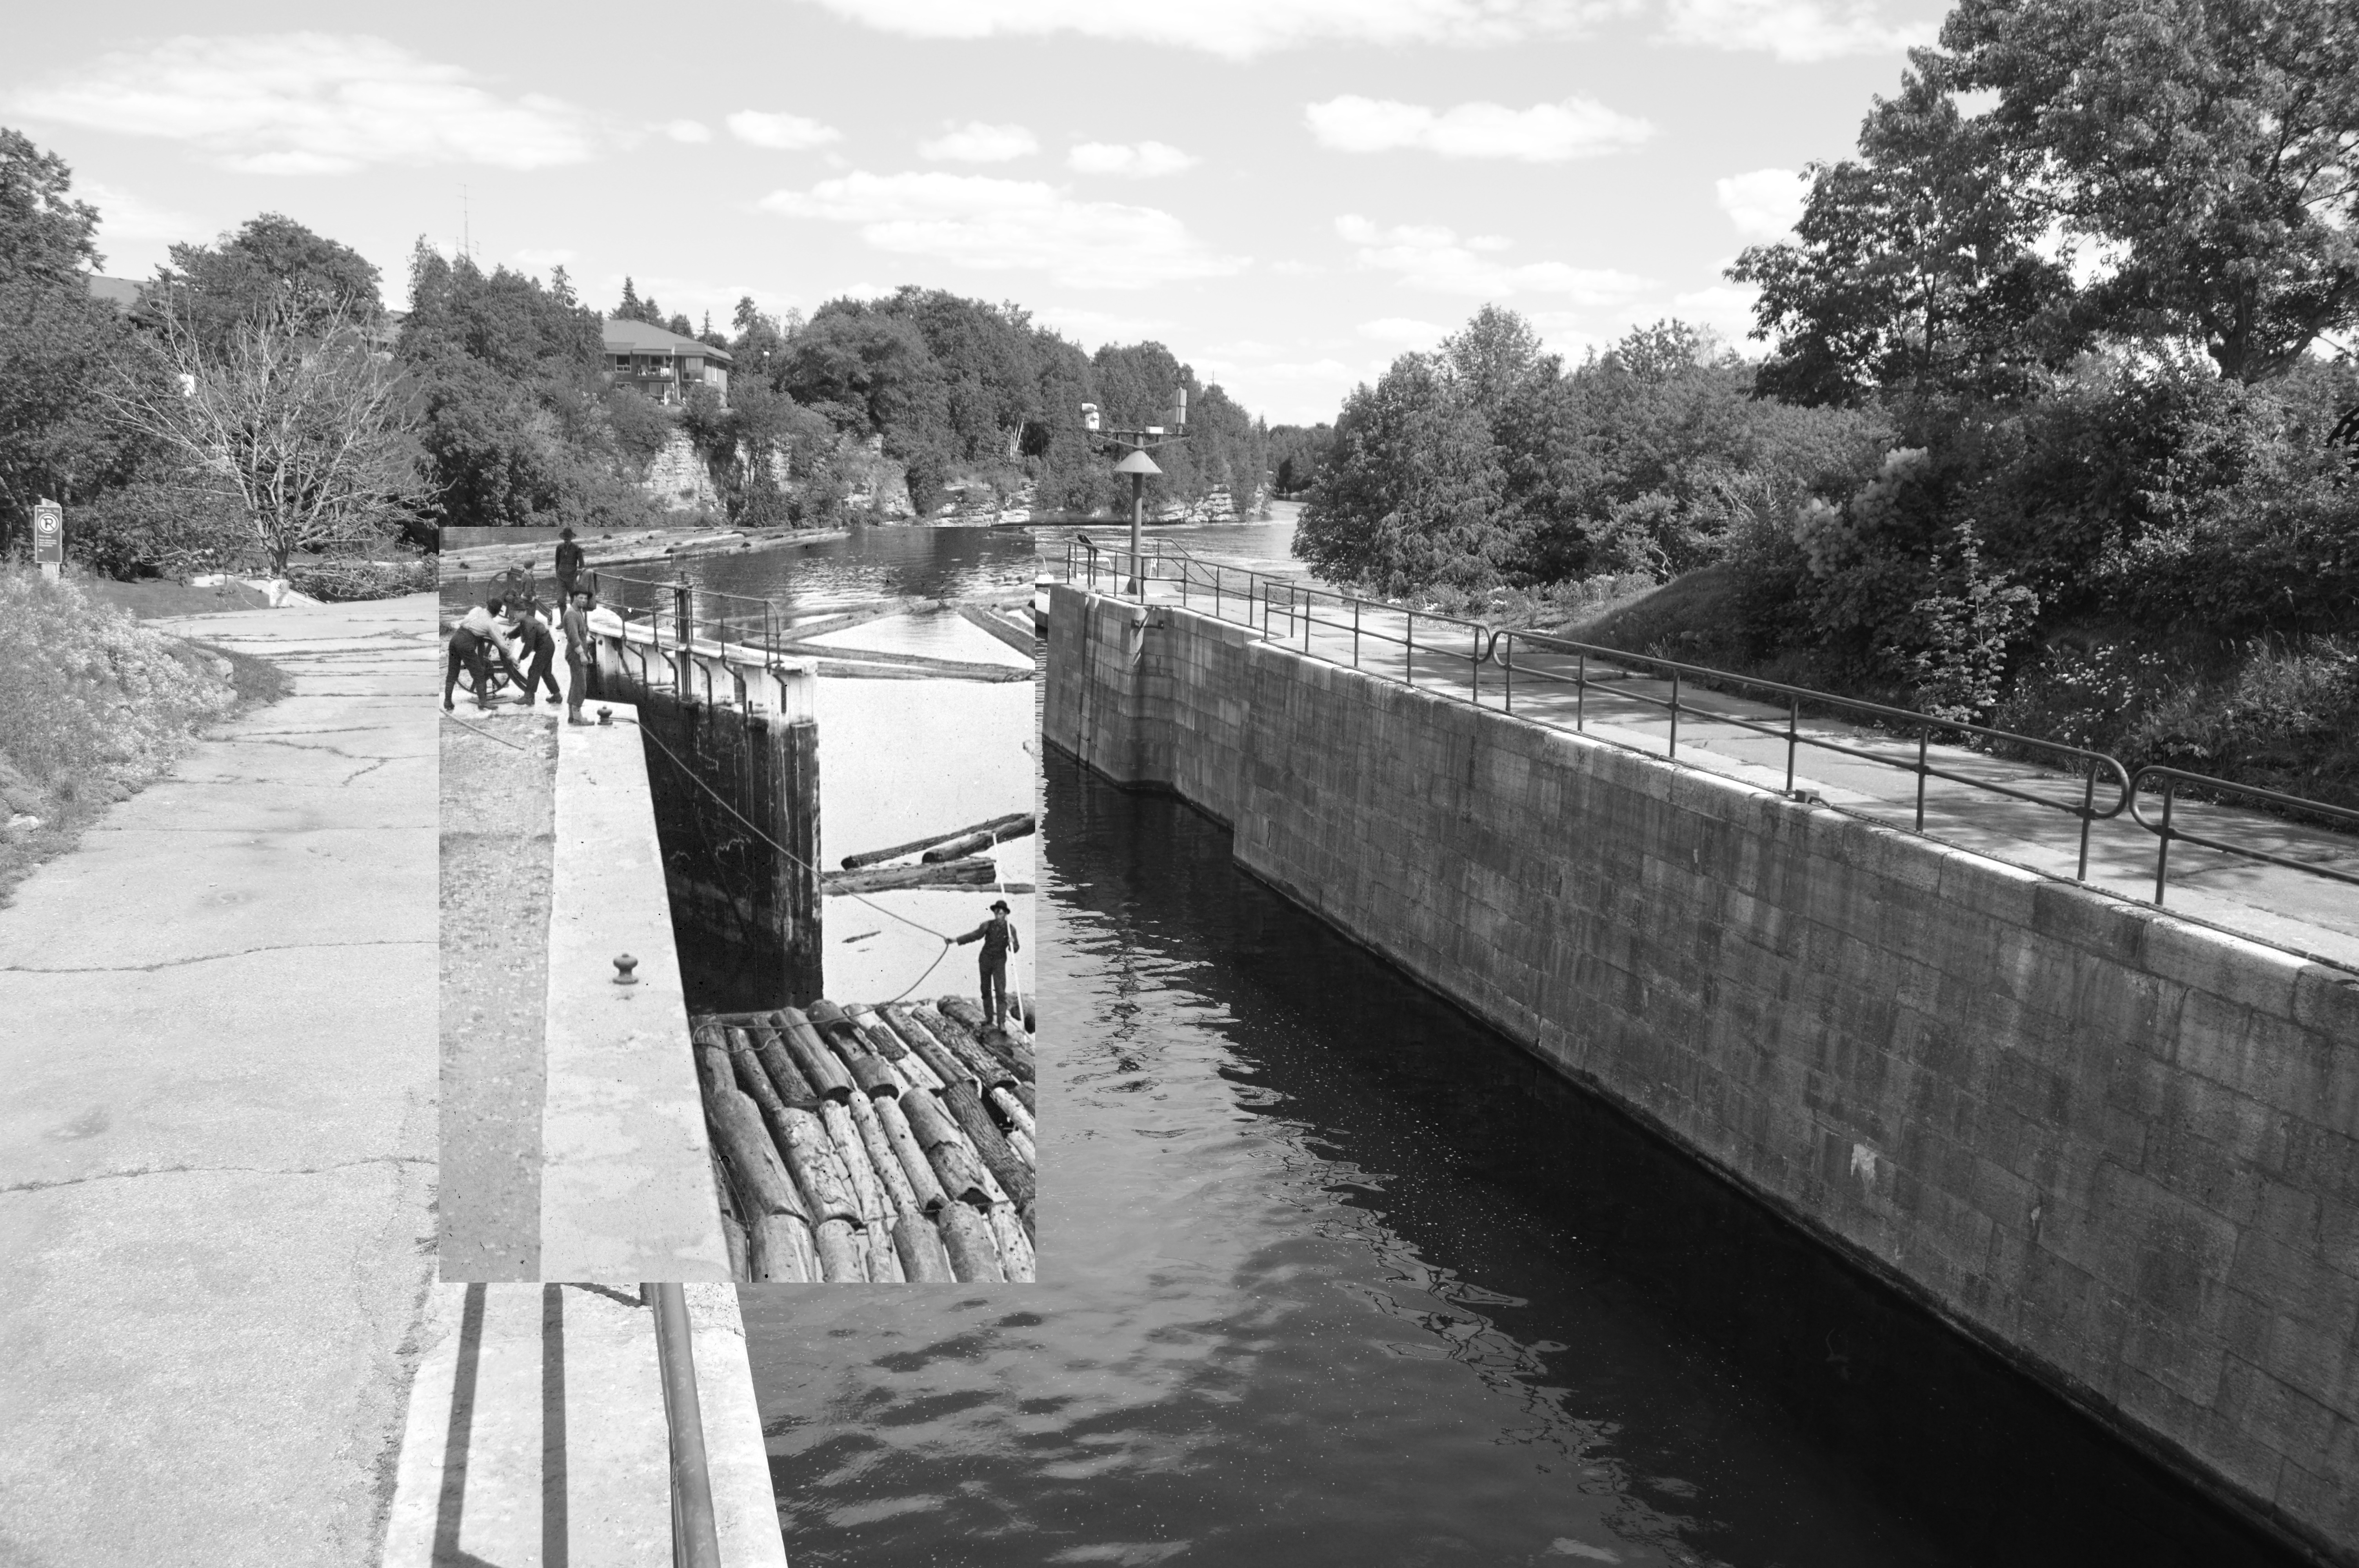 A back and white photograph of a block of timber passing through locks, superimposed on a modern image of a canal.